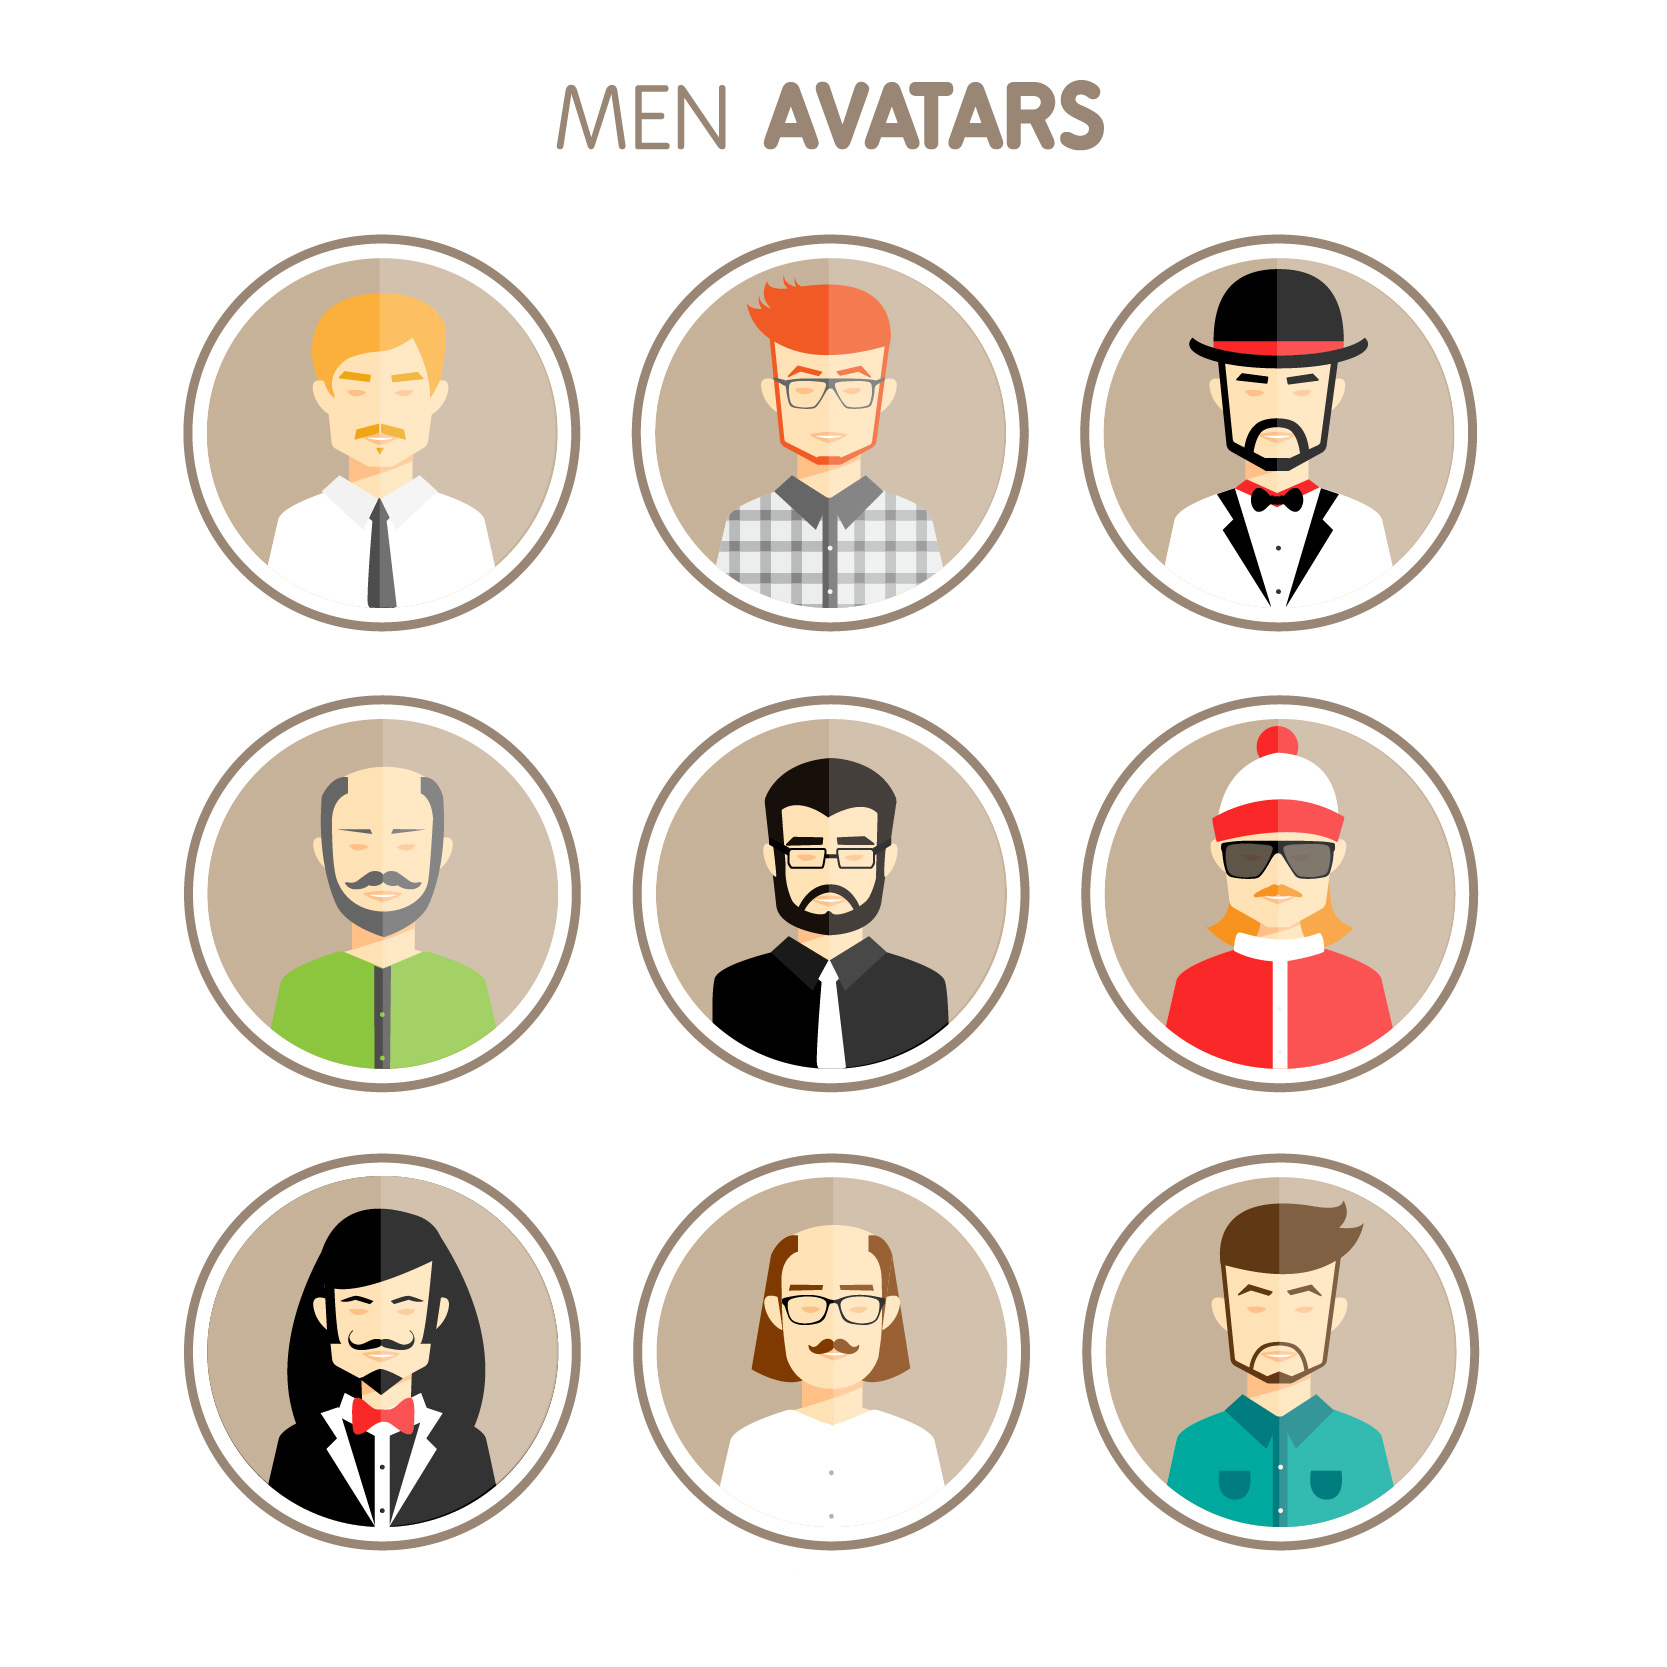 Download FREE 30+ Vector People Avatars Set in PSD